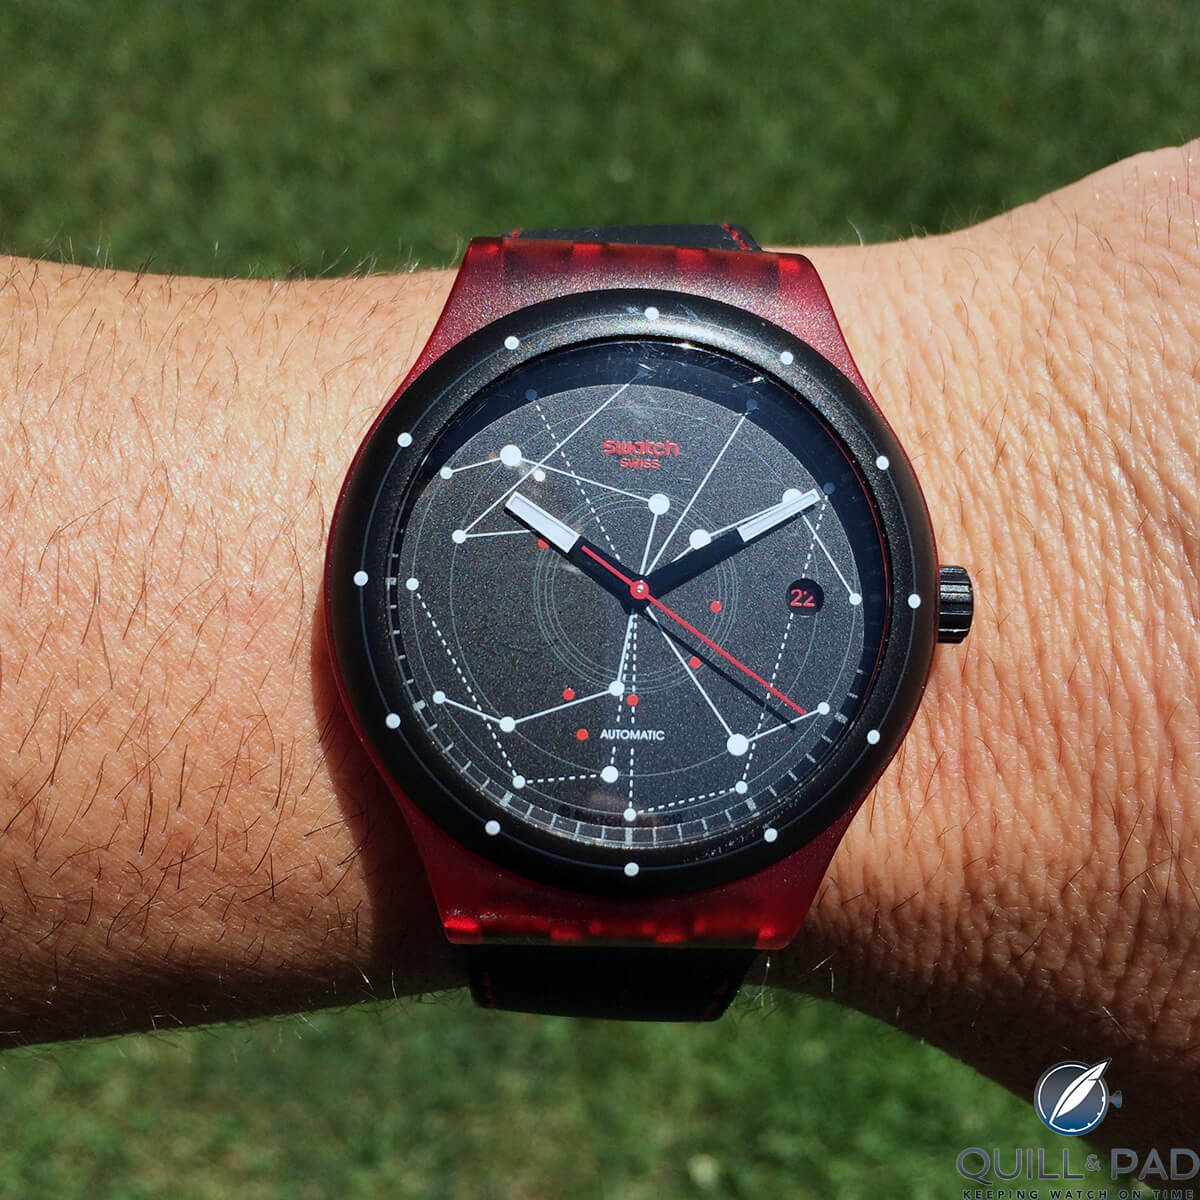 John Keil’s Swatch Sistem51 was intended to be a good-luck charm